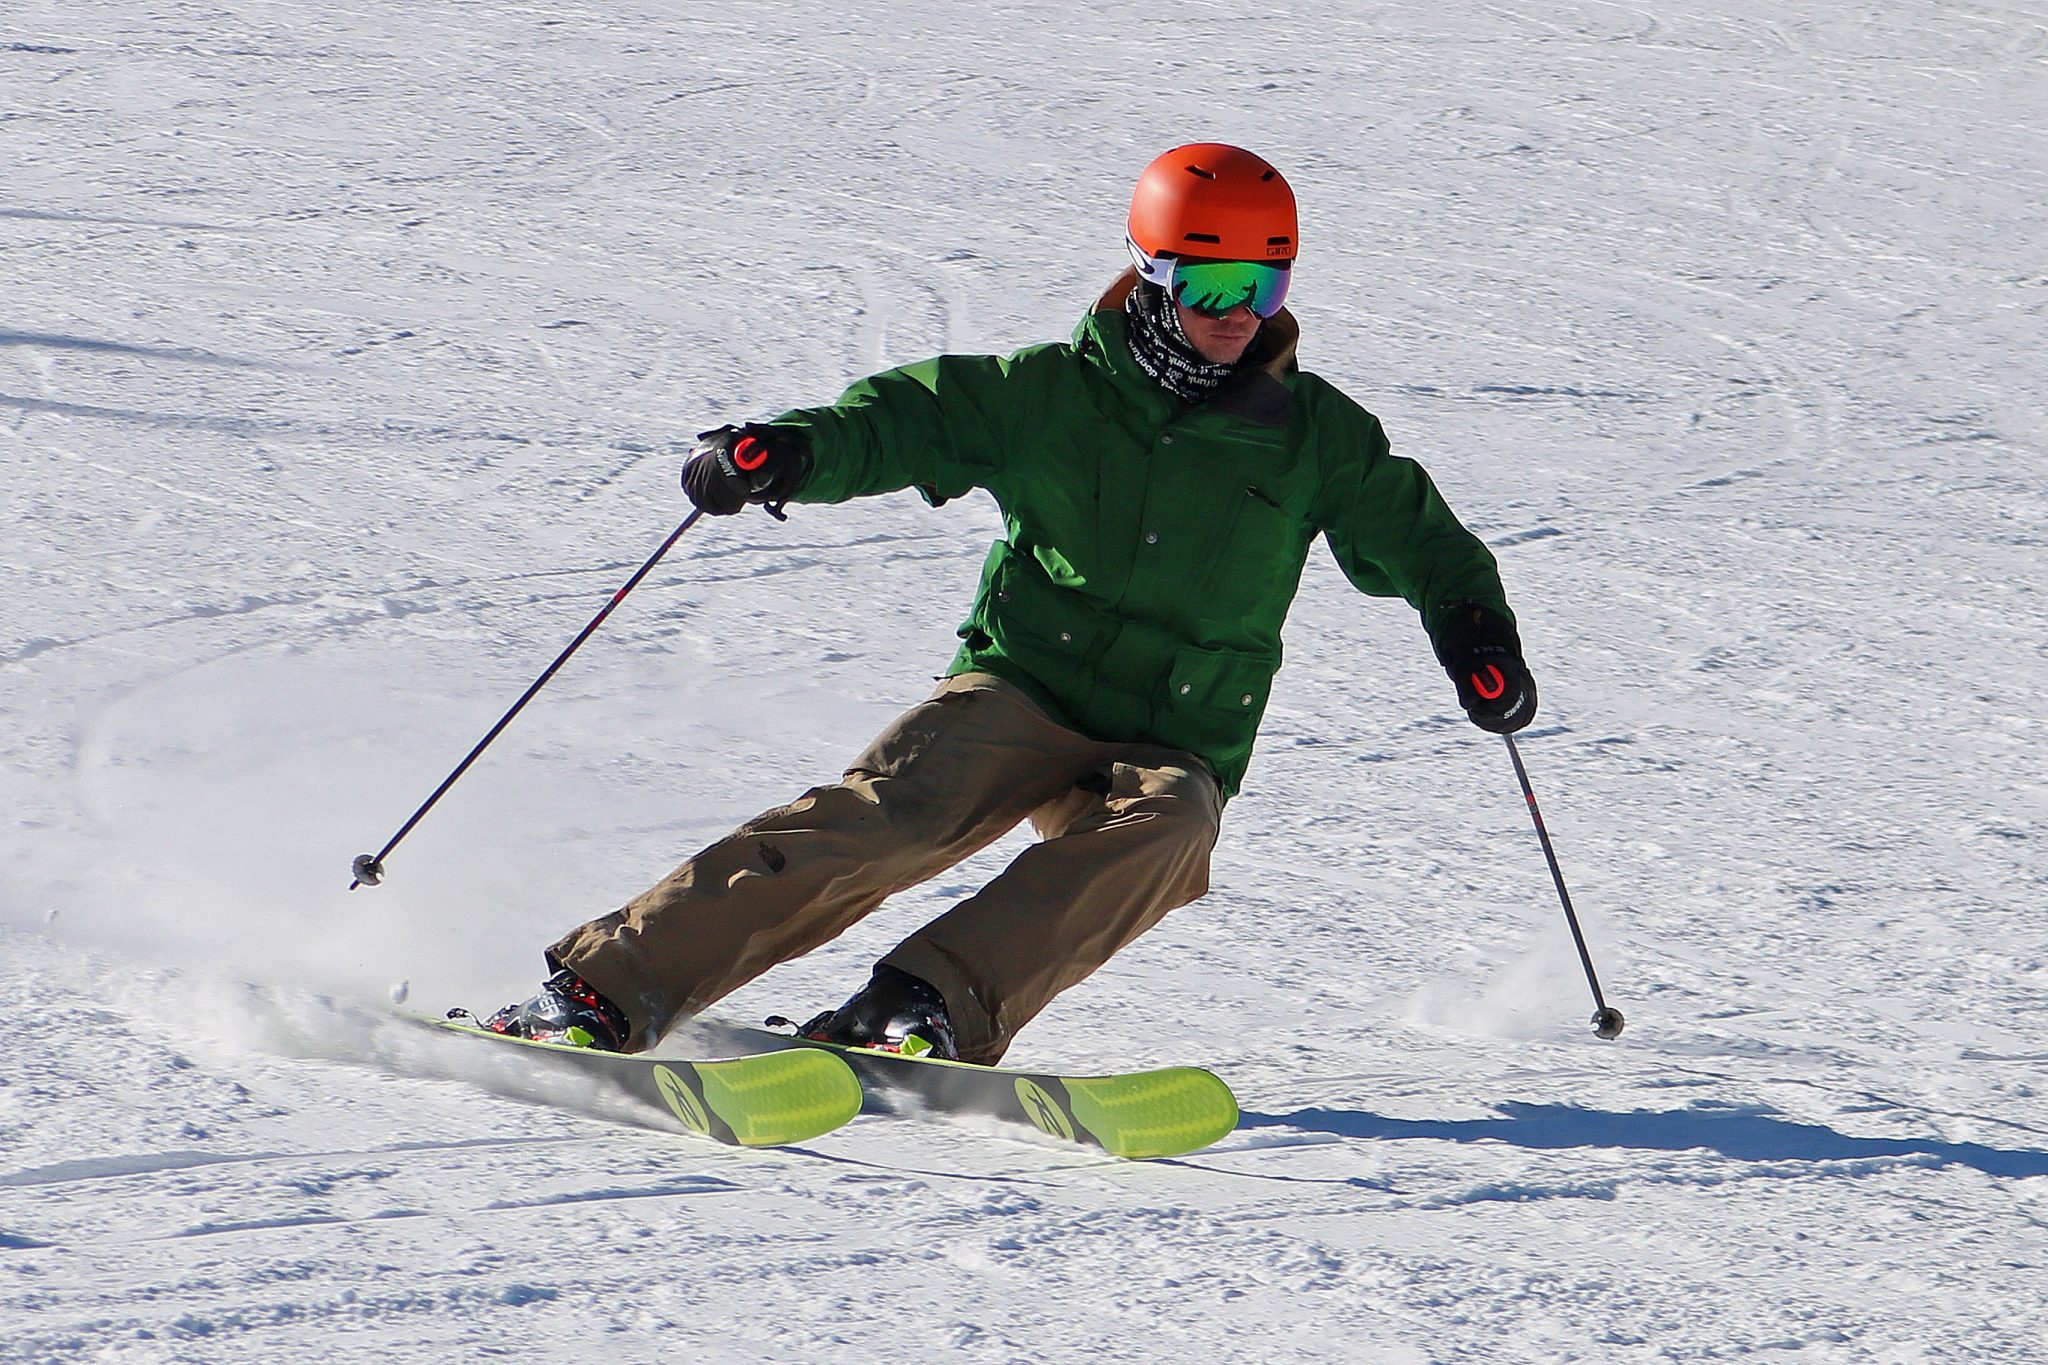 learn to ski with ski lessons in Scotland